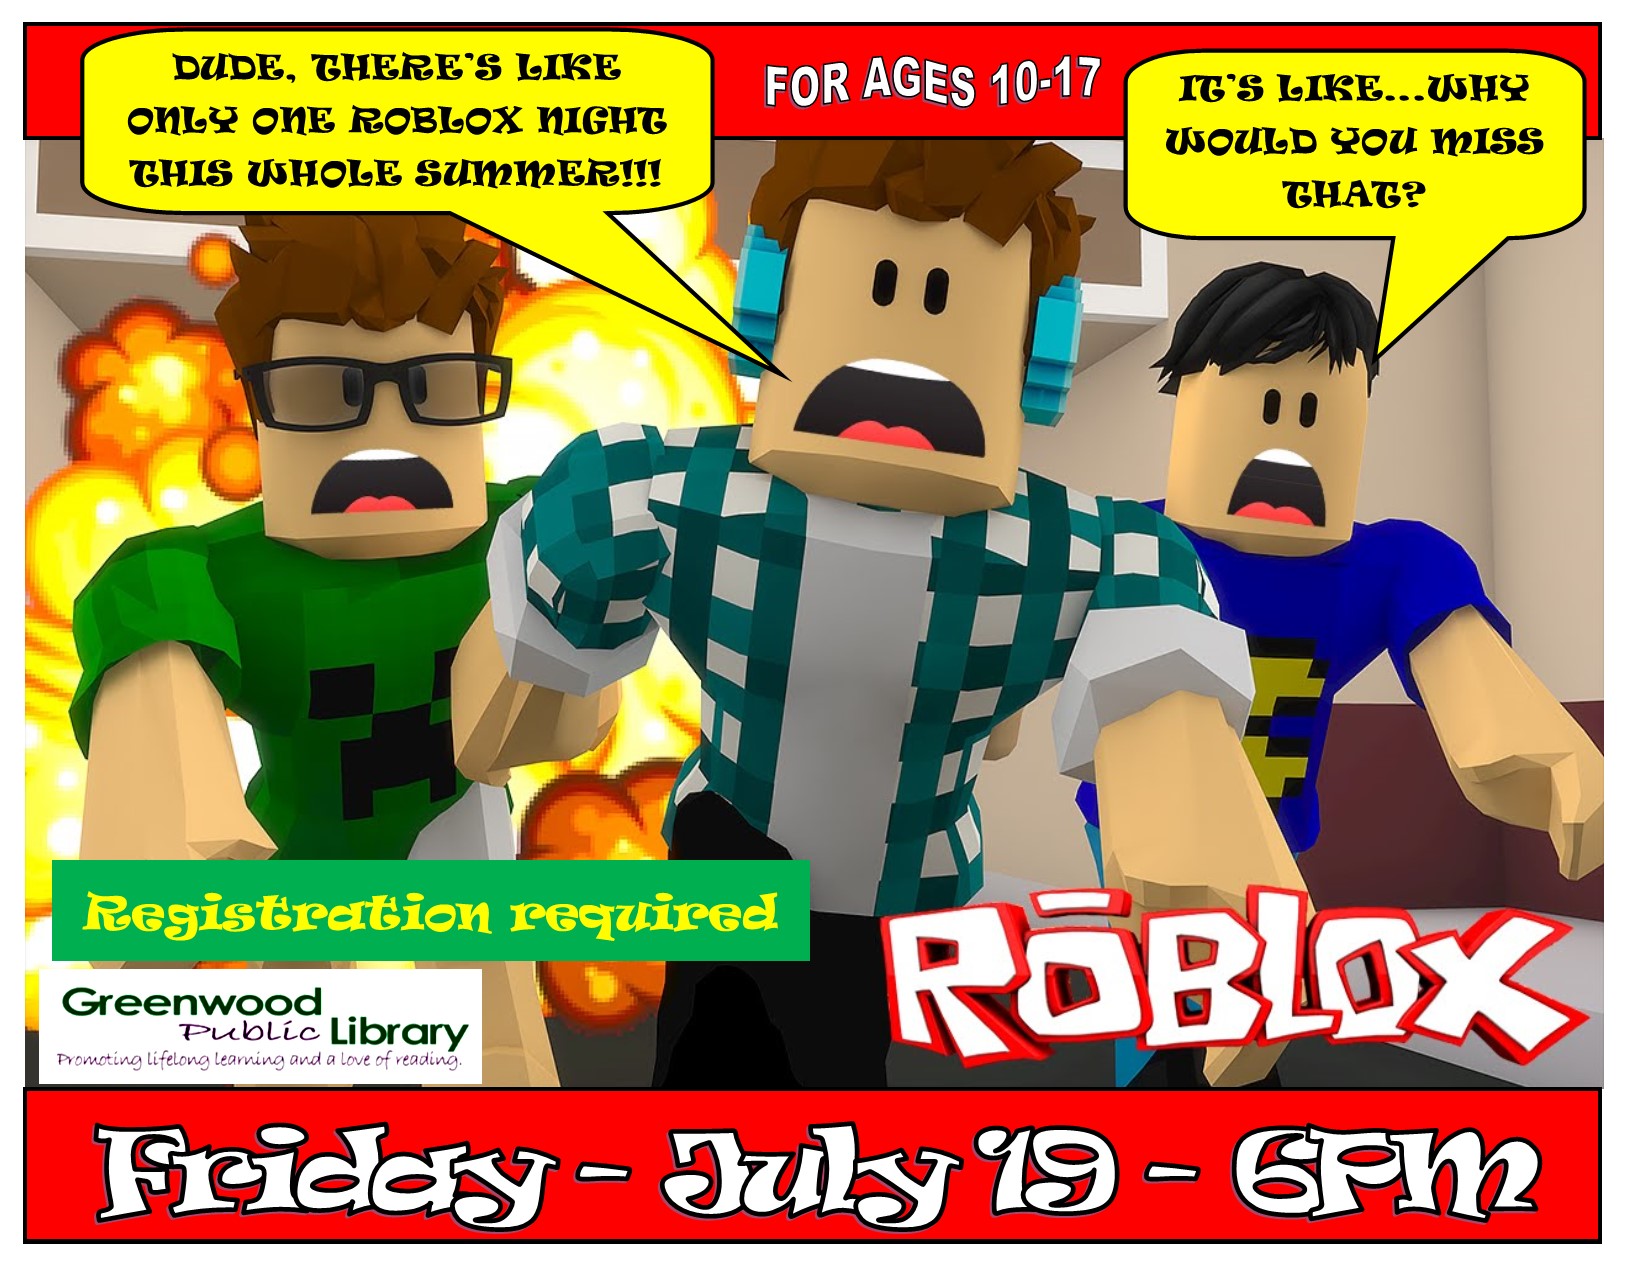 Roblox Night For Tweens Teens Greenwood Library - on select fridays from 6 7 30pm teens and tweens ages 10 18 are invited to spend an evening playing roblox in addition tables will be set up so that card